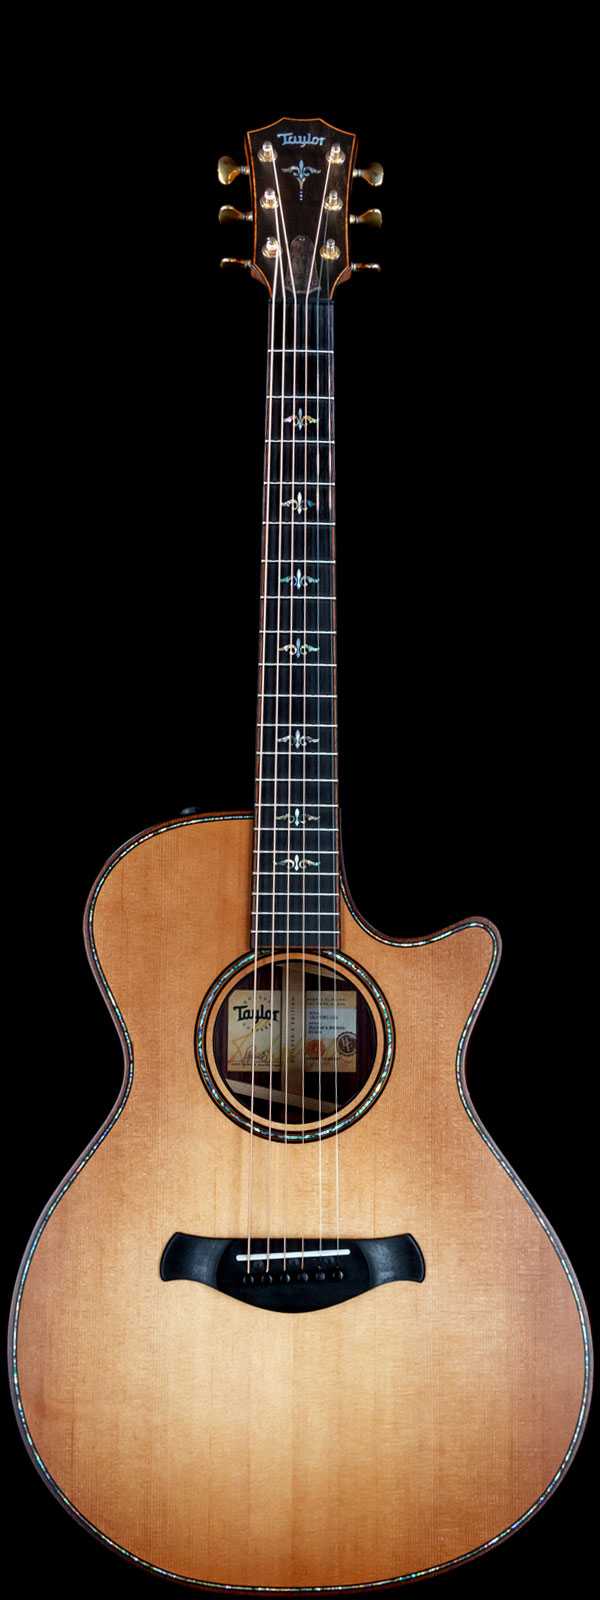 Taylor Builder’s Edition 912ce Acoustic-Electric Lutz Spruce Top Indian Rosewood Body Wild Honey Burst